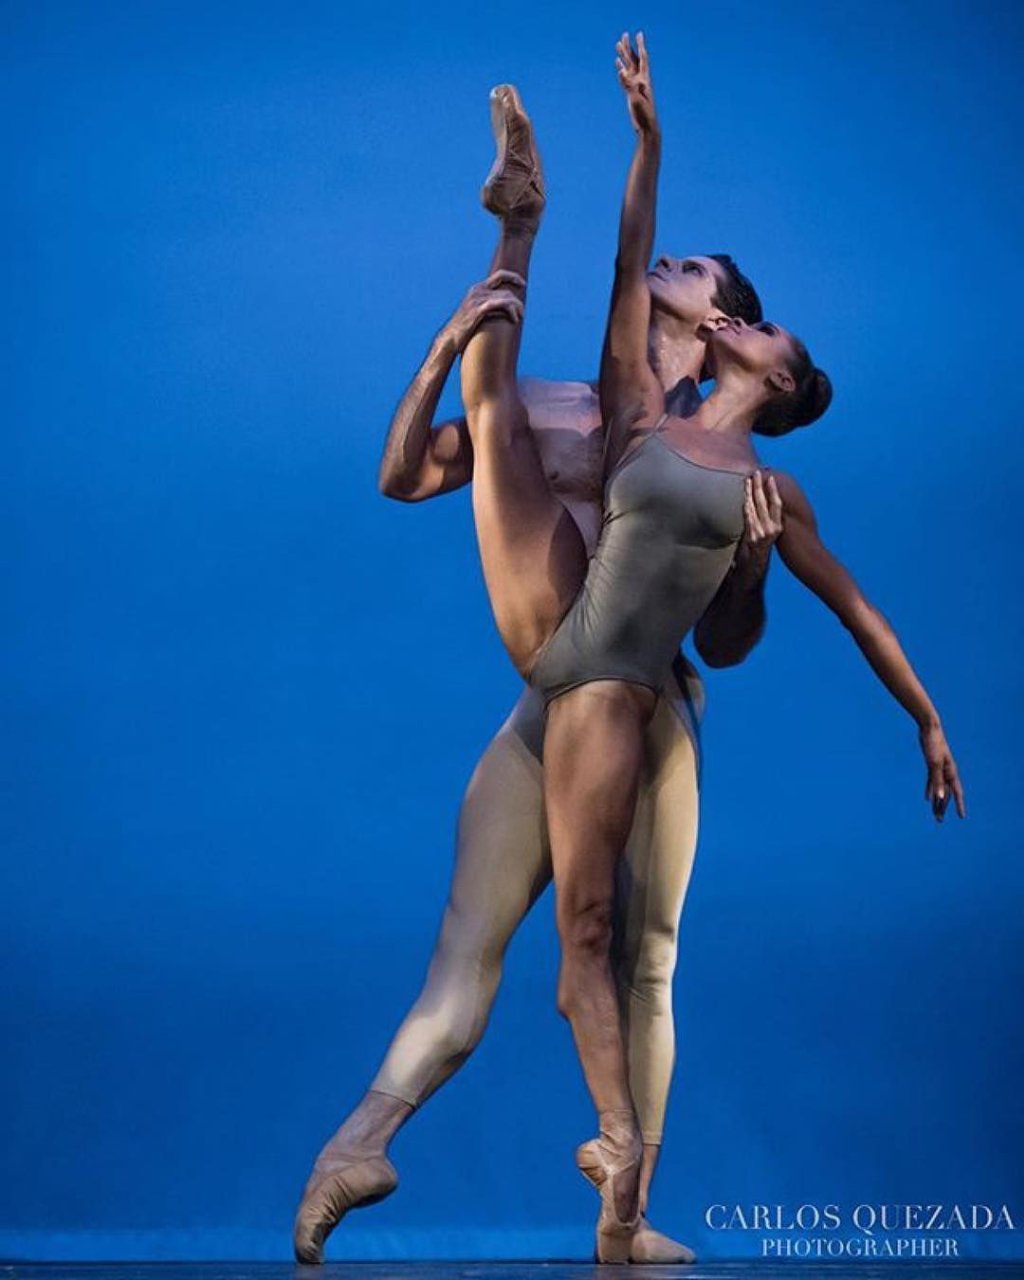 In 1998, at the age of 15, Misty Copeland won a Spotlight Award from Los An...